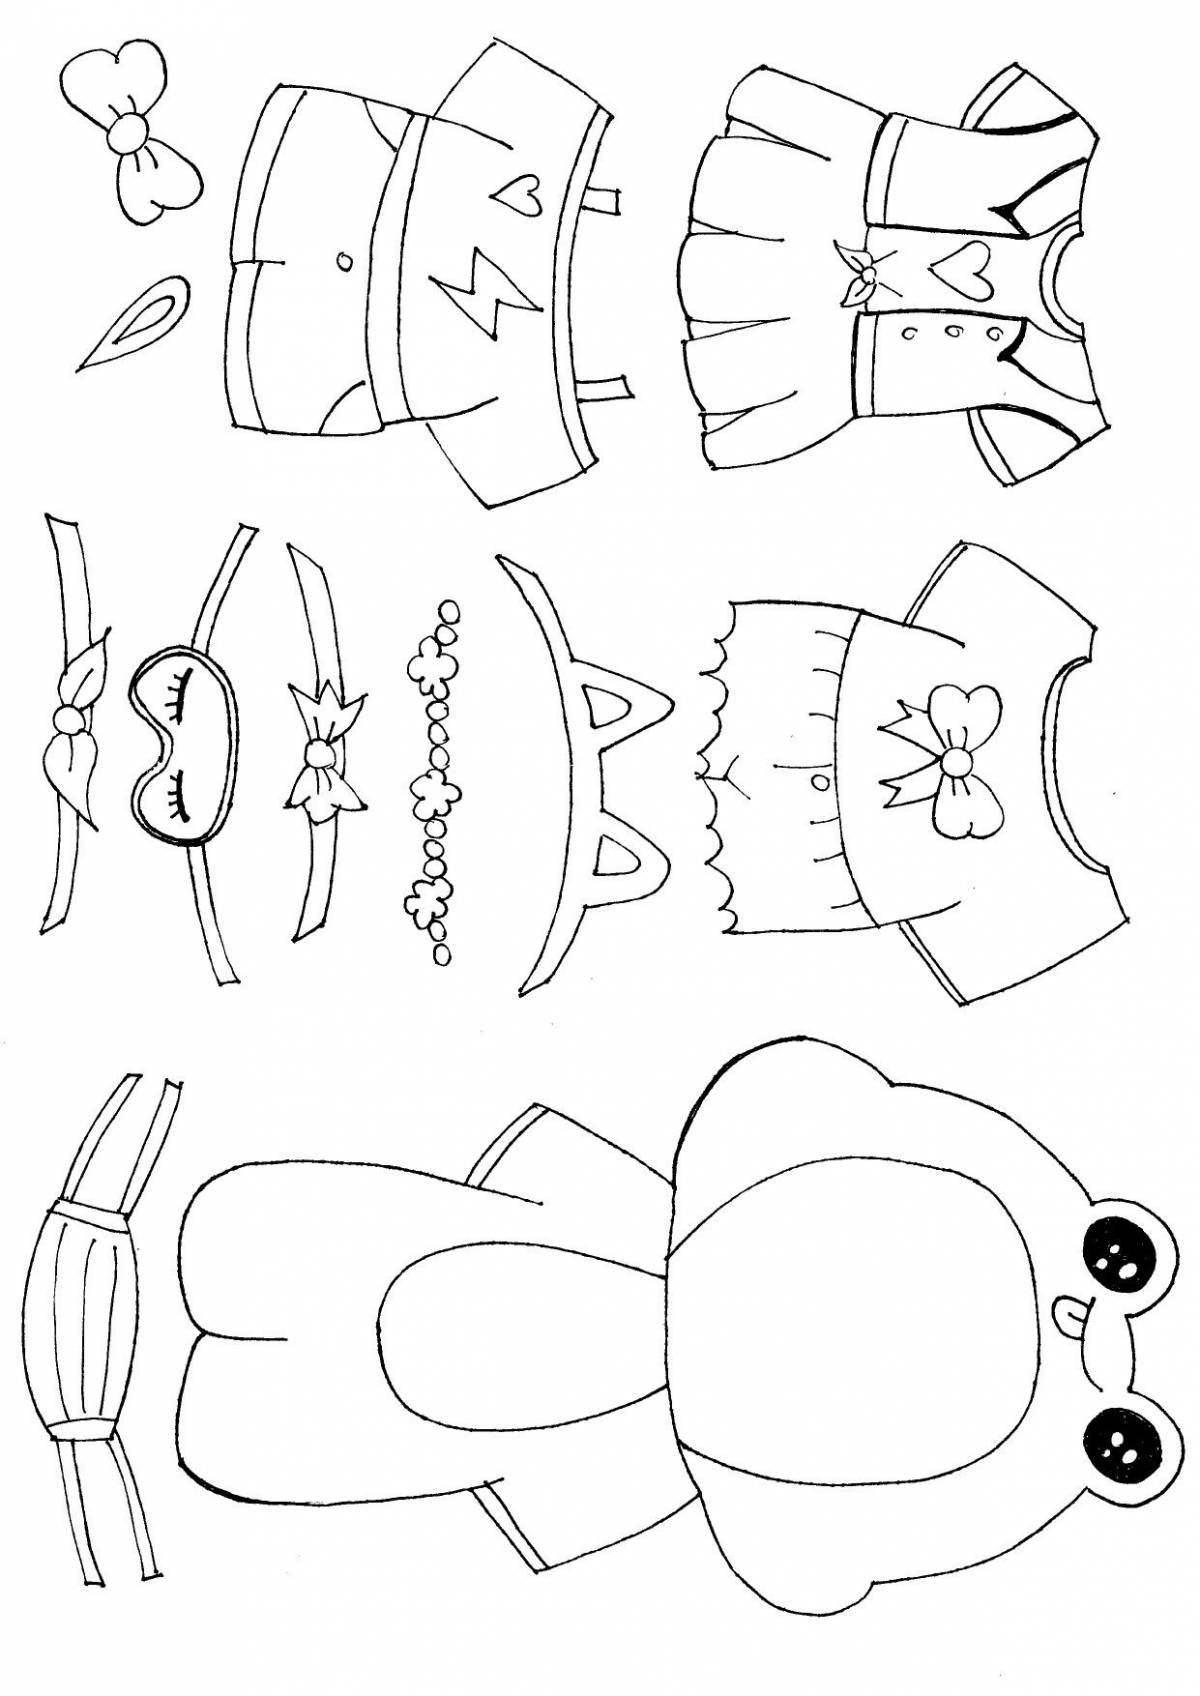 Playful clothing coloring page for ooty lalafanfan